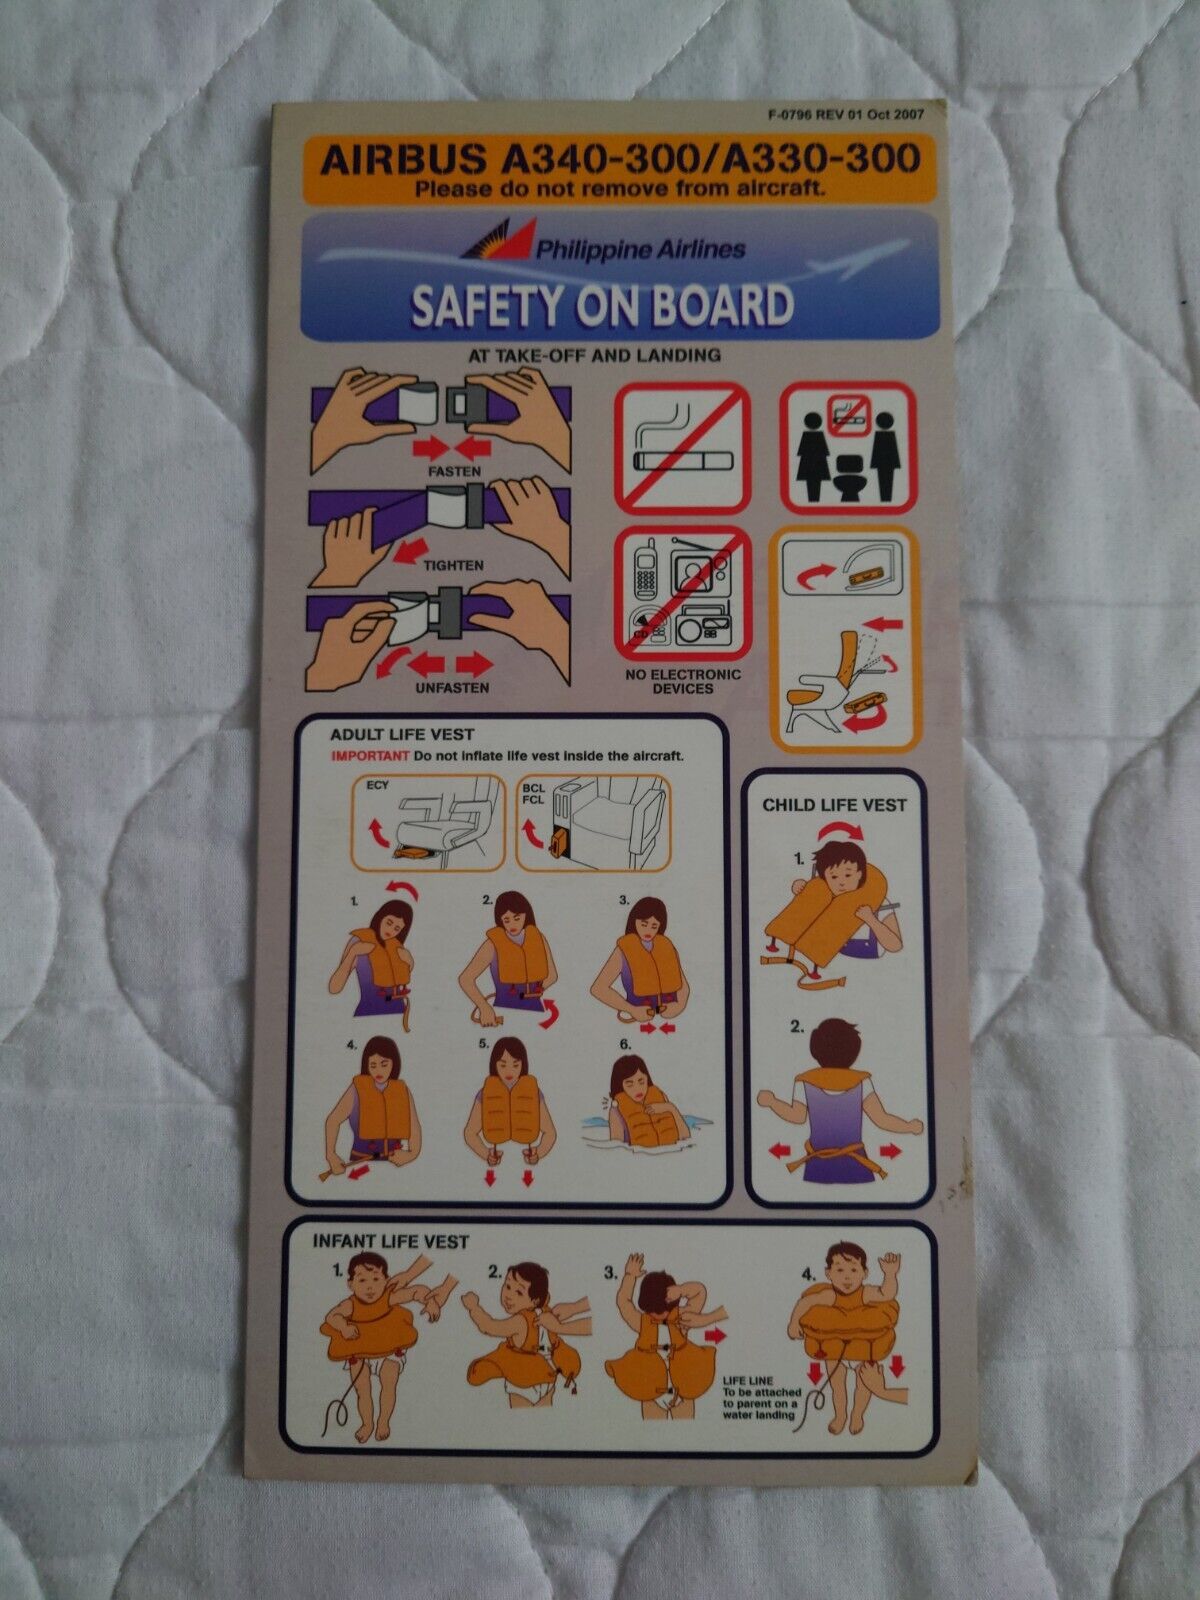 Philippine Airlines Airbus A340-300/A330-300 Rev 01 OCT 2007  Safety Card